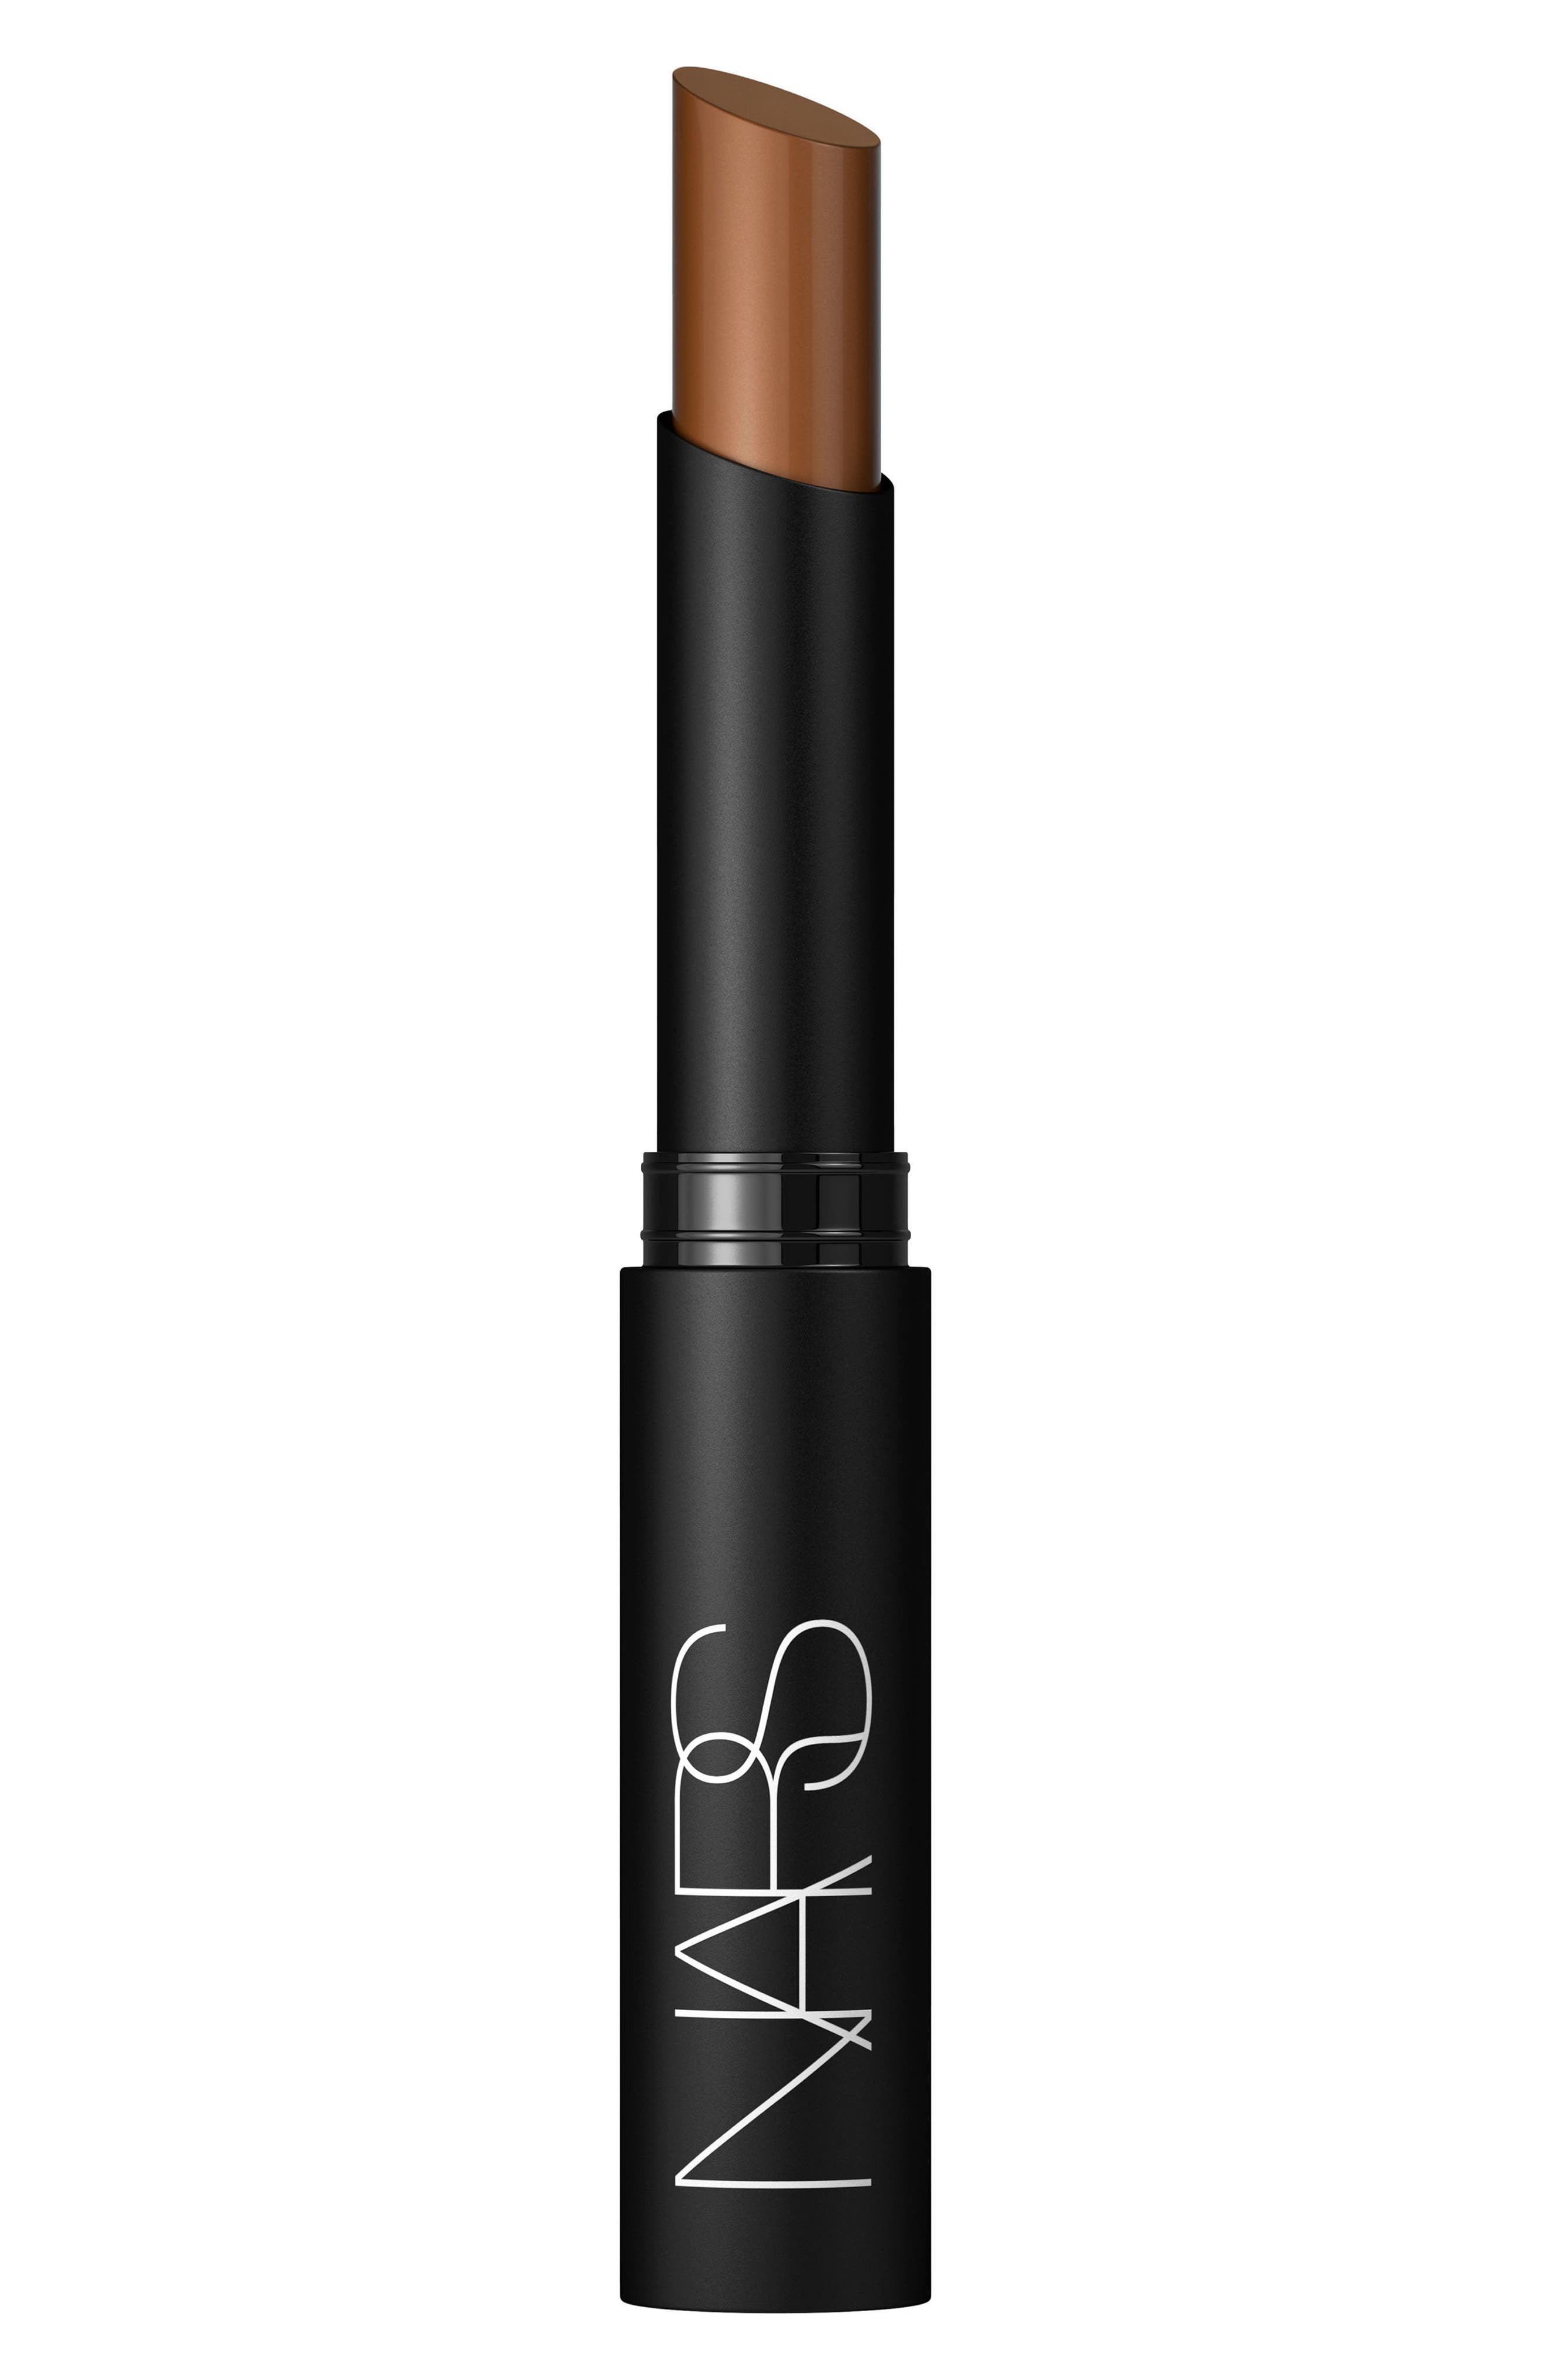 UPC 607845012160 product image for NARS 'Immaculate Complexion' Concealer Cafe One Size | upcitemdb.com